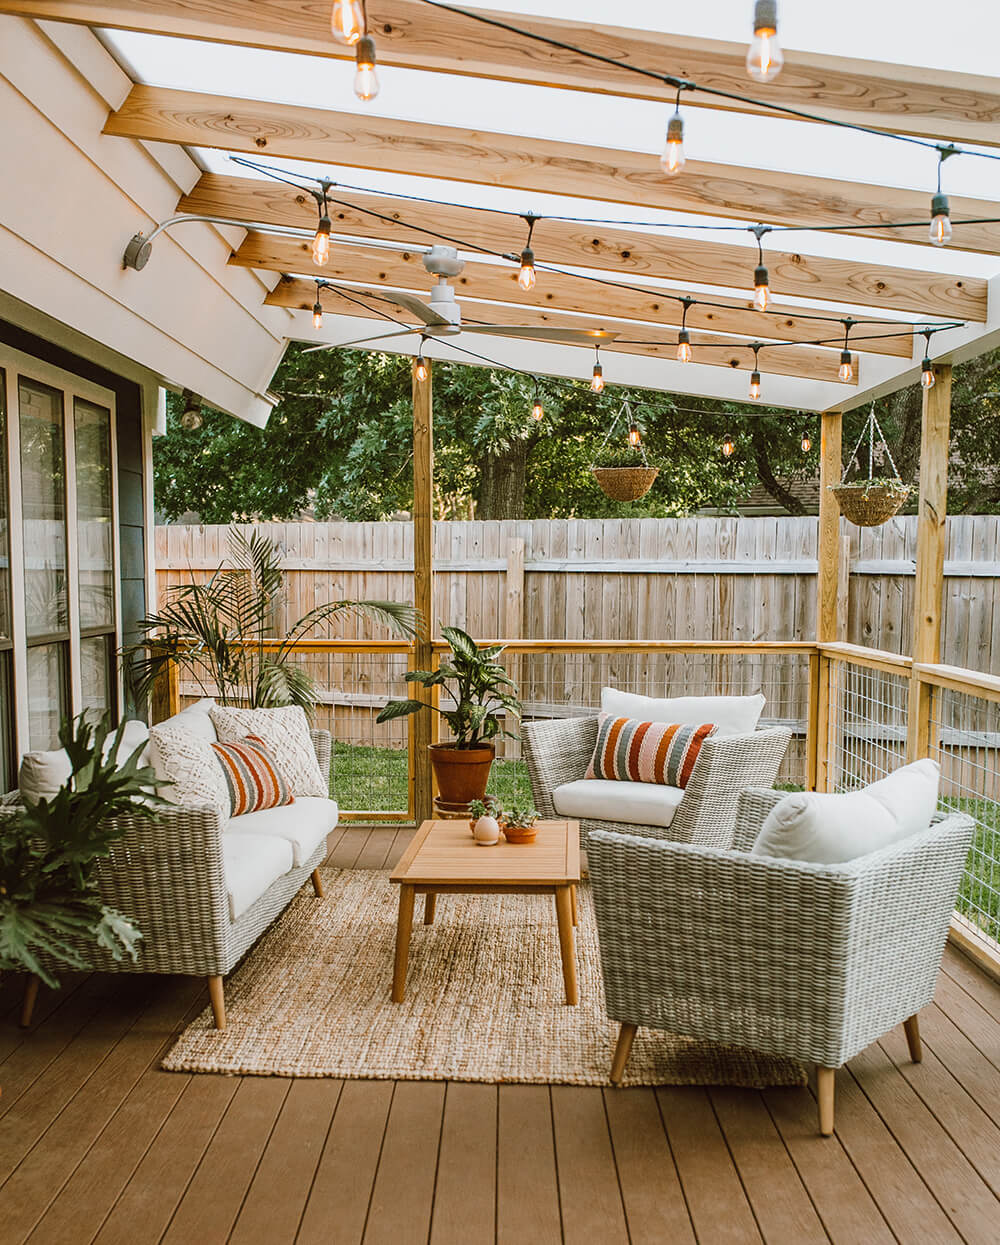 21 Best Relaxing Porch Design and Decor Ideas for 2021